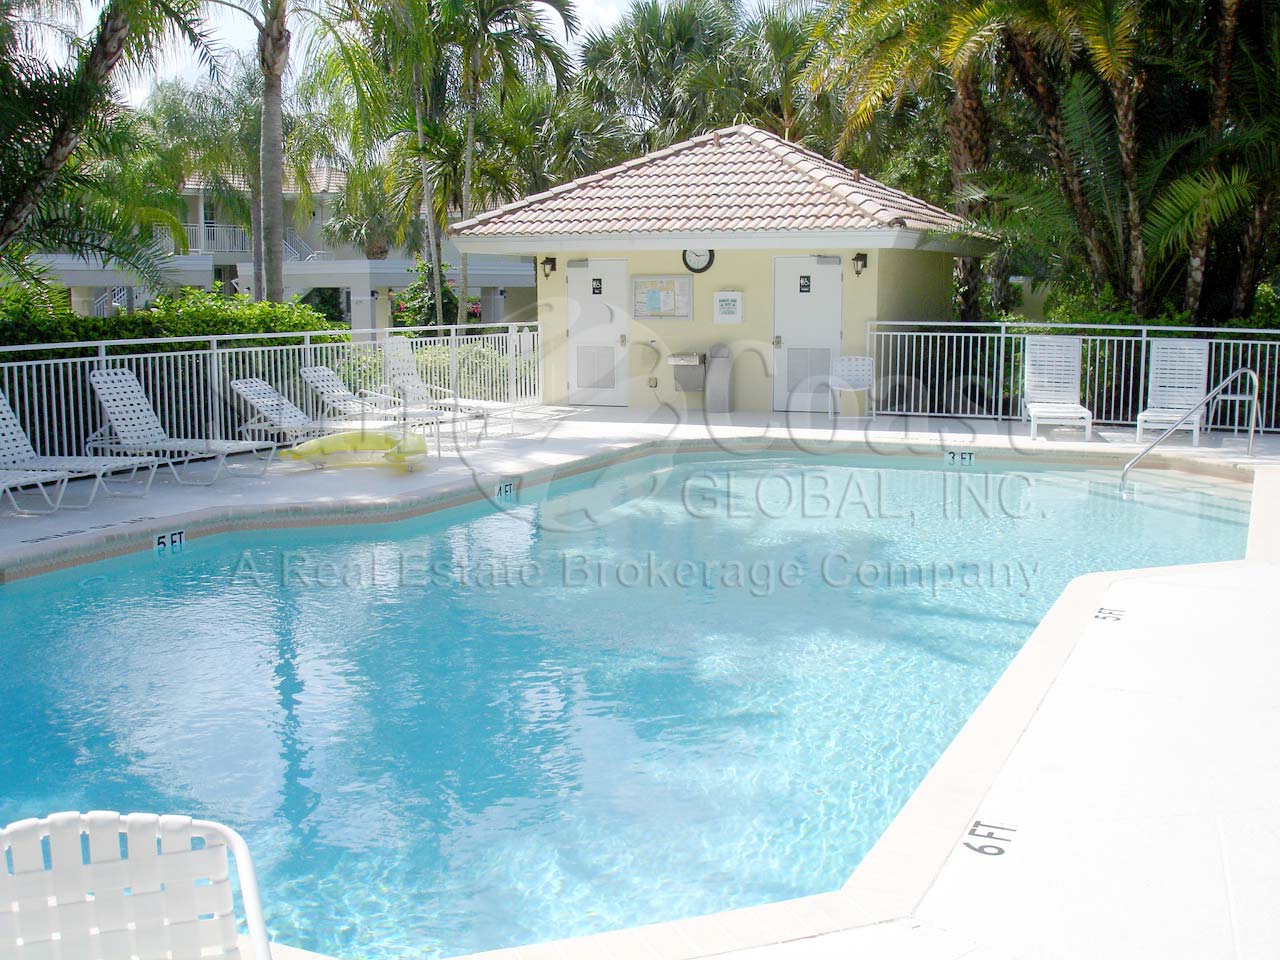 3-6 foot community pool with pavered deck and grill